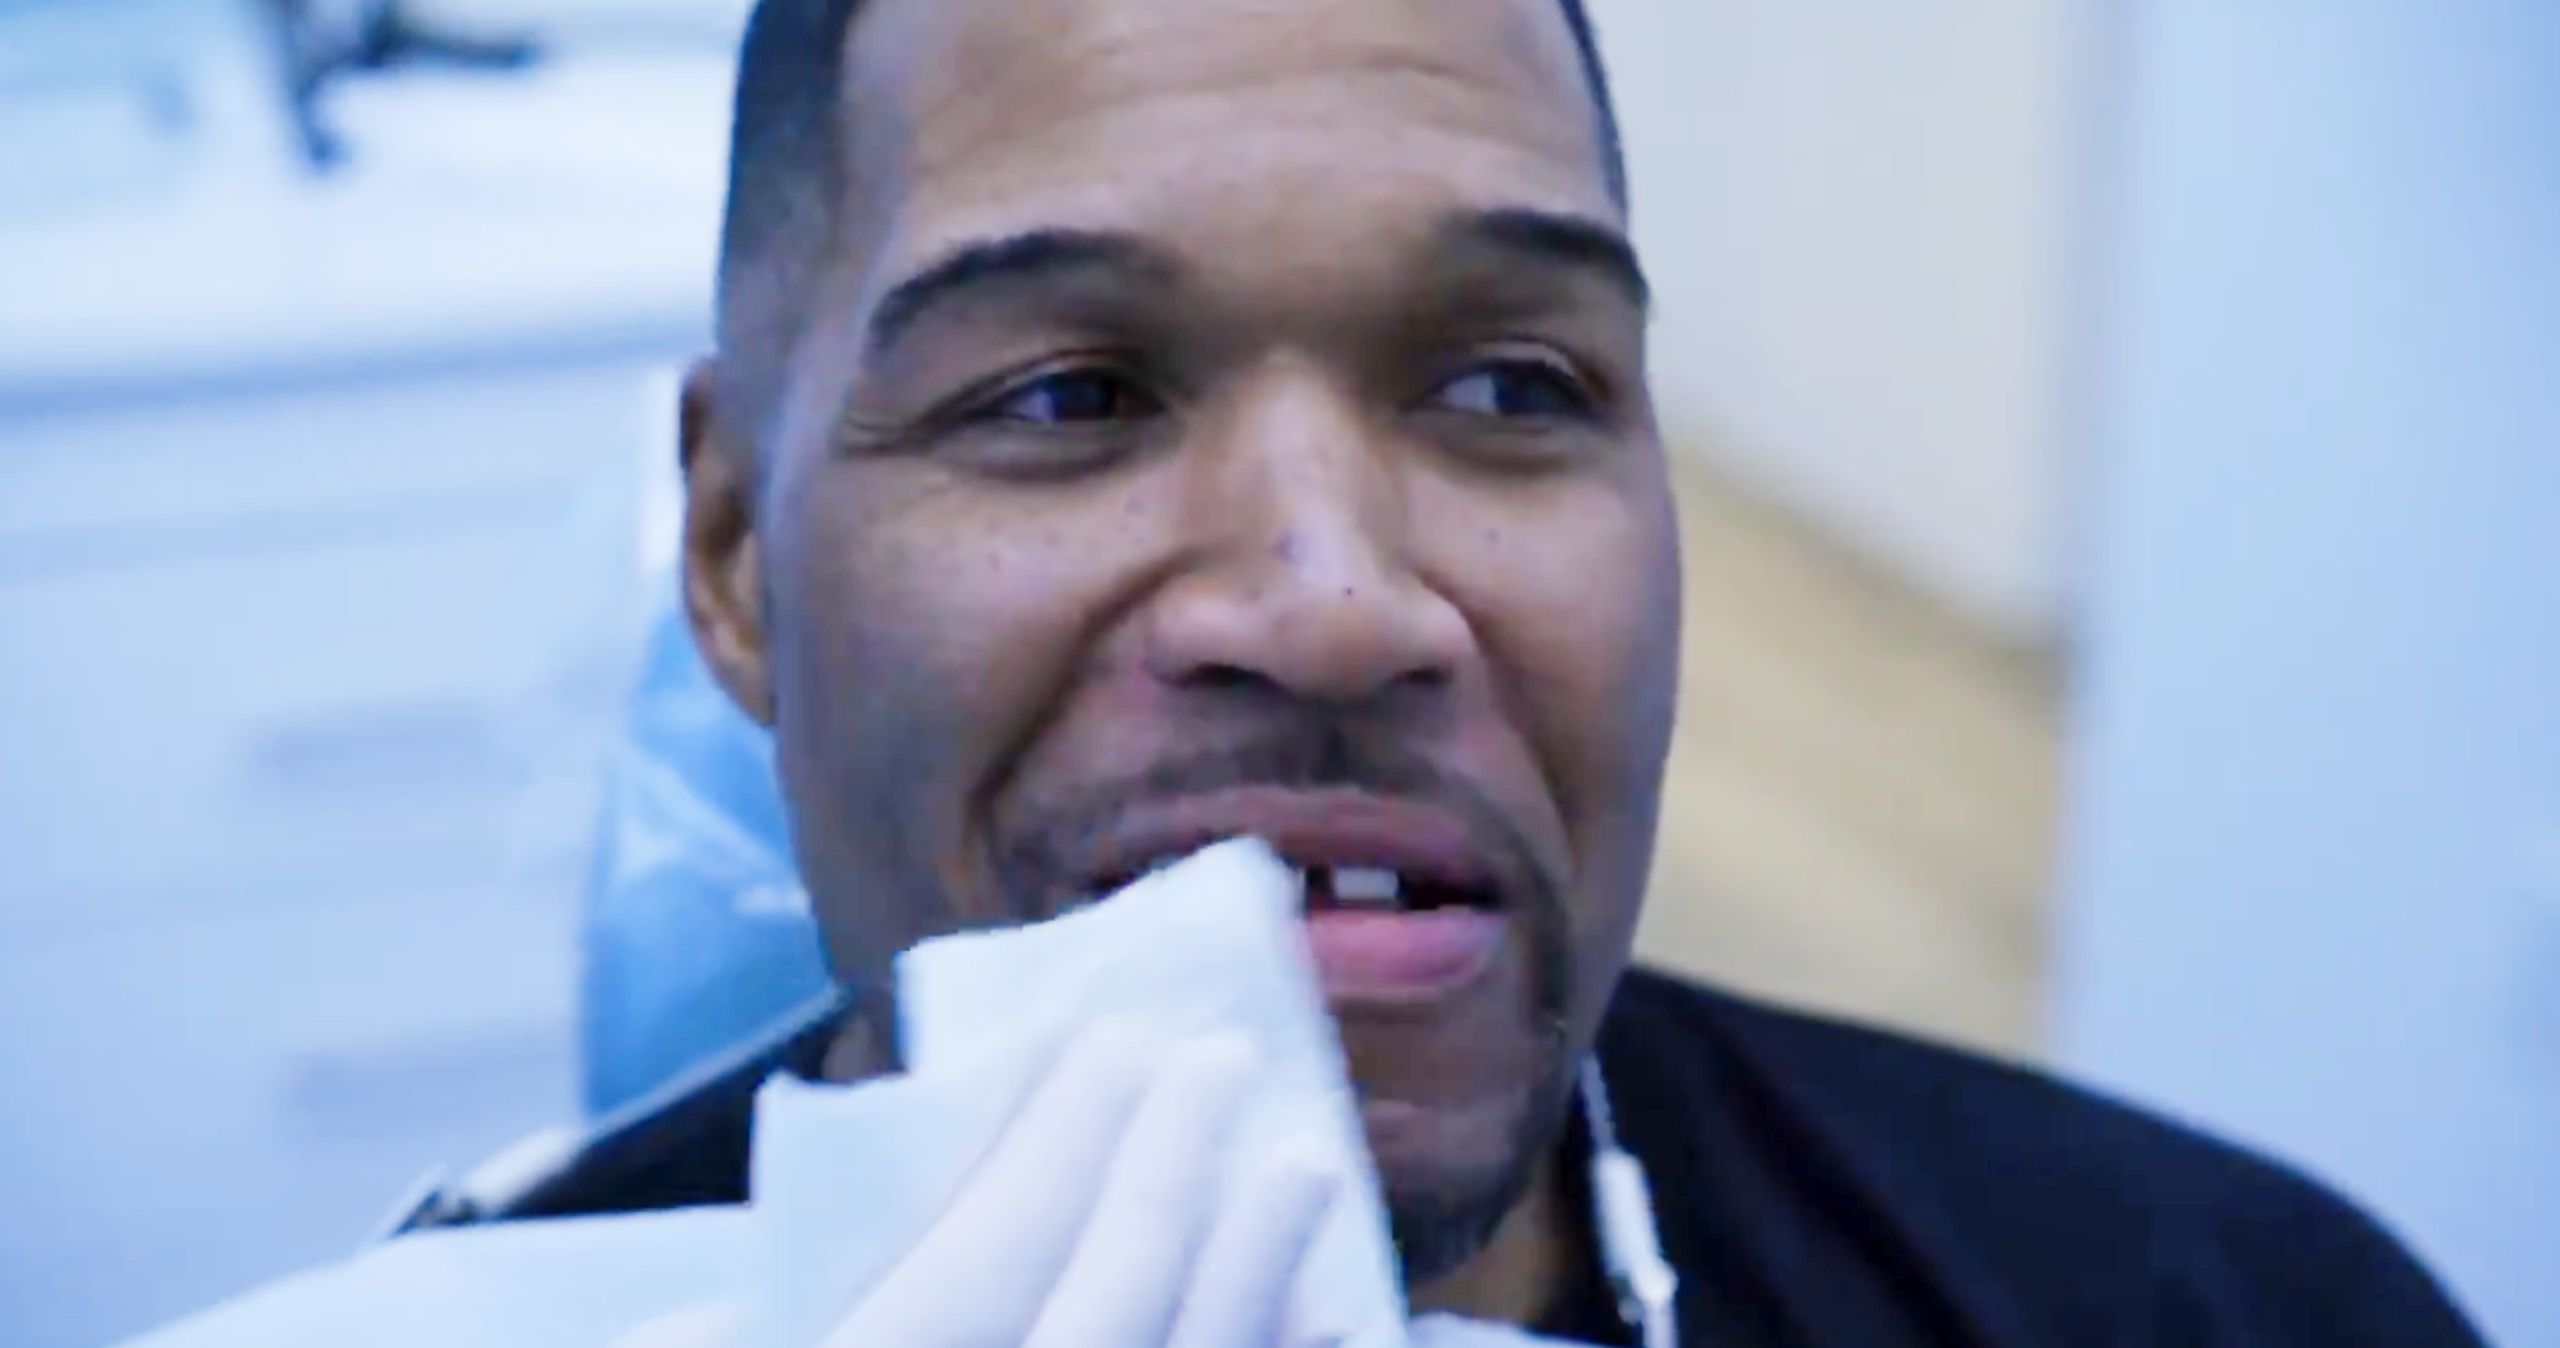 Michael Strahan Fixes His Iconic Tooth Gap, But It's Only Temporary